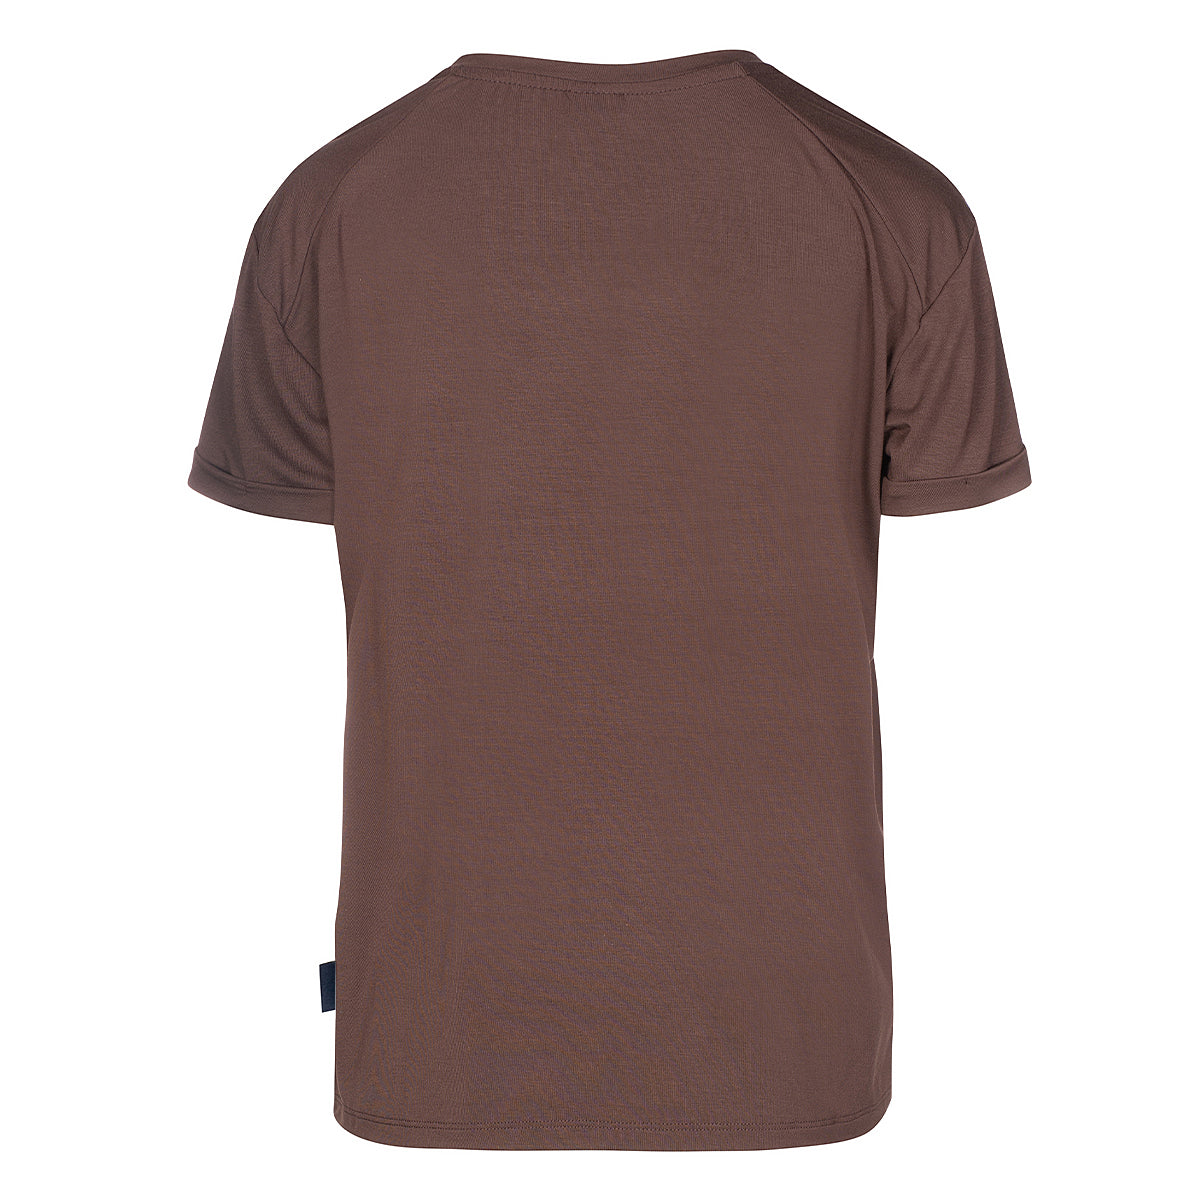 LUXZUZ // ONE TWO Karin Bamboo T-Shirt 799 Choco Lux